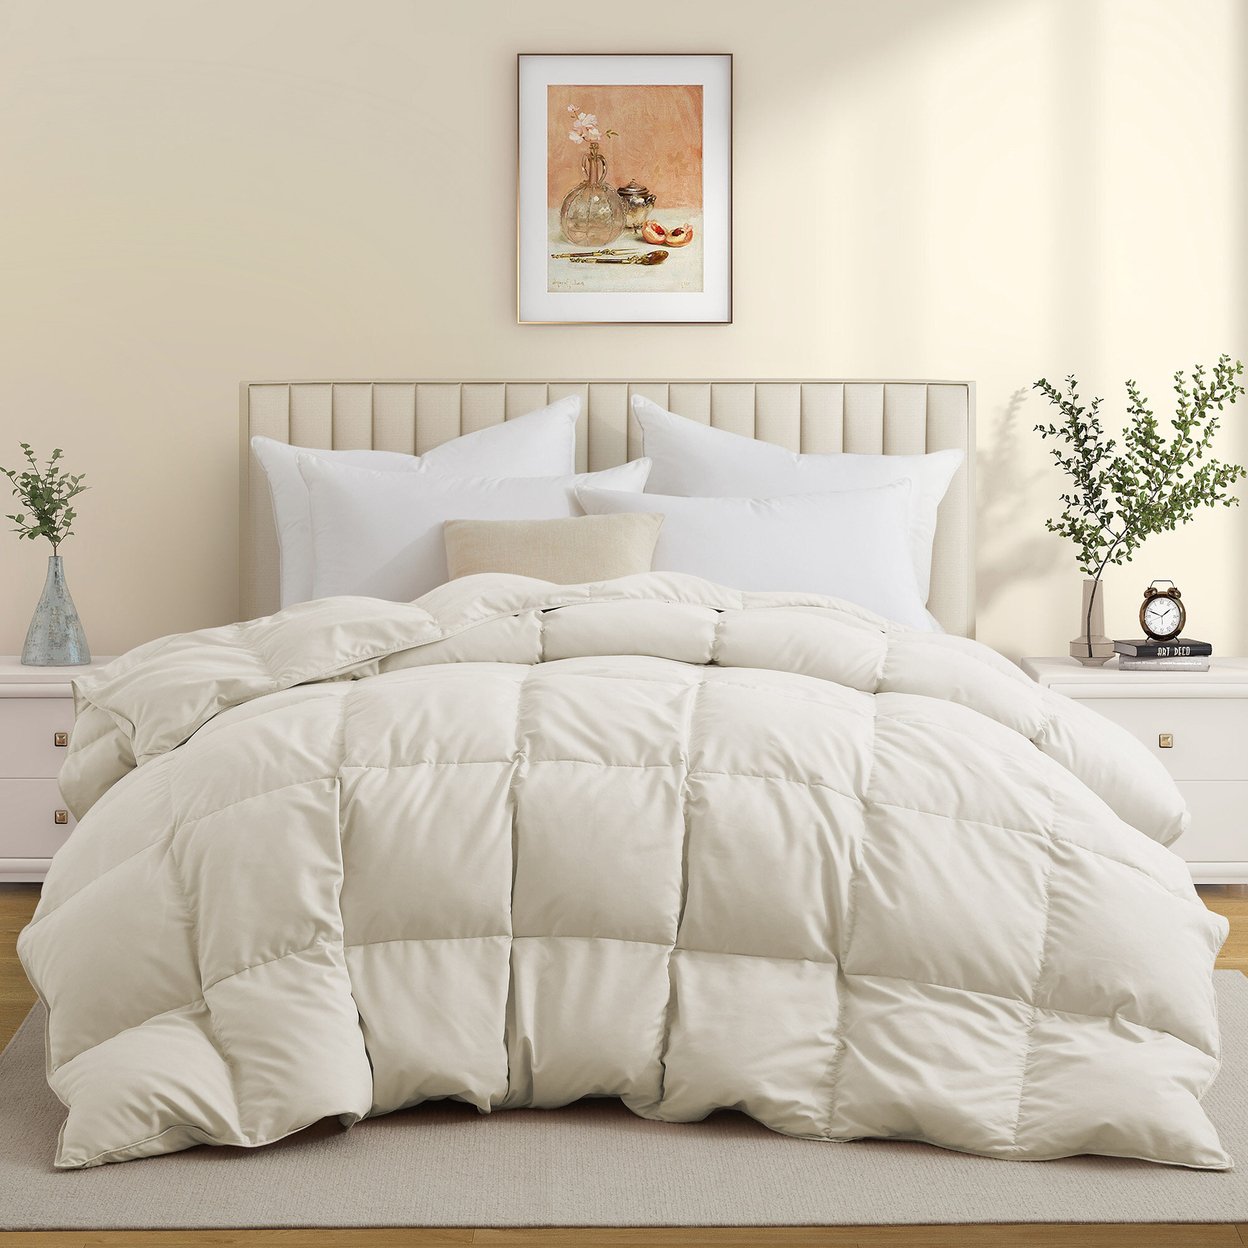 Premium All Seasons White Goose Feather Fiber And Down Comforter - Butter Cream, Full/Queen